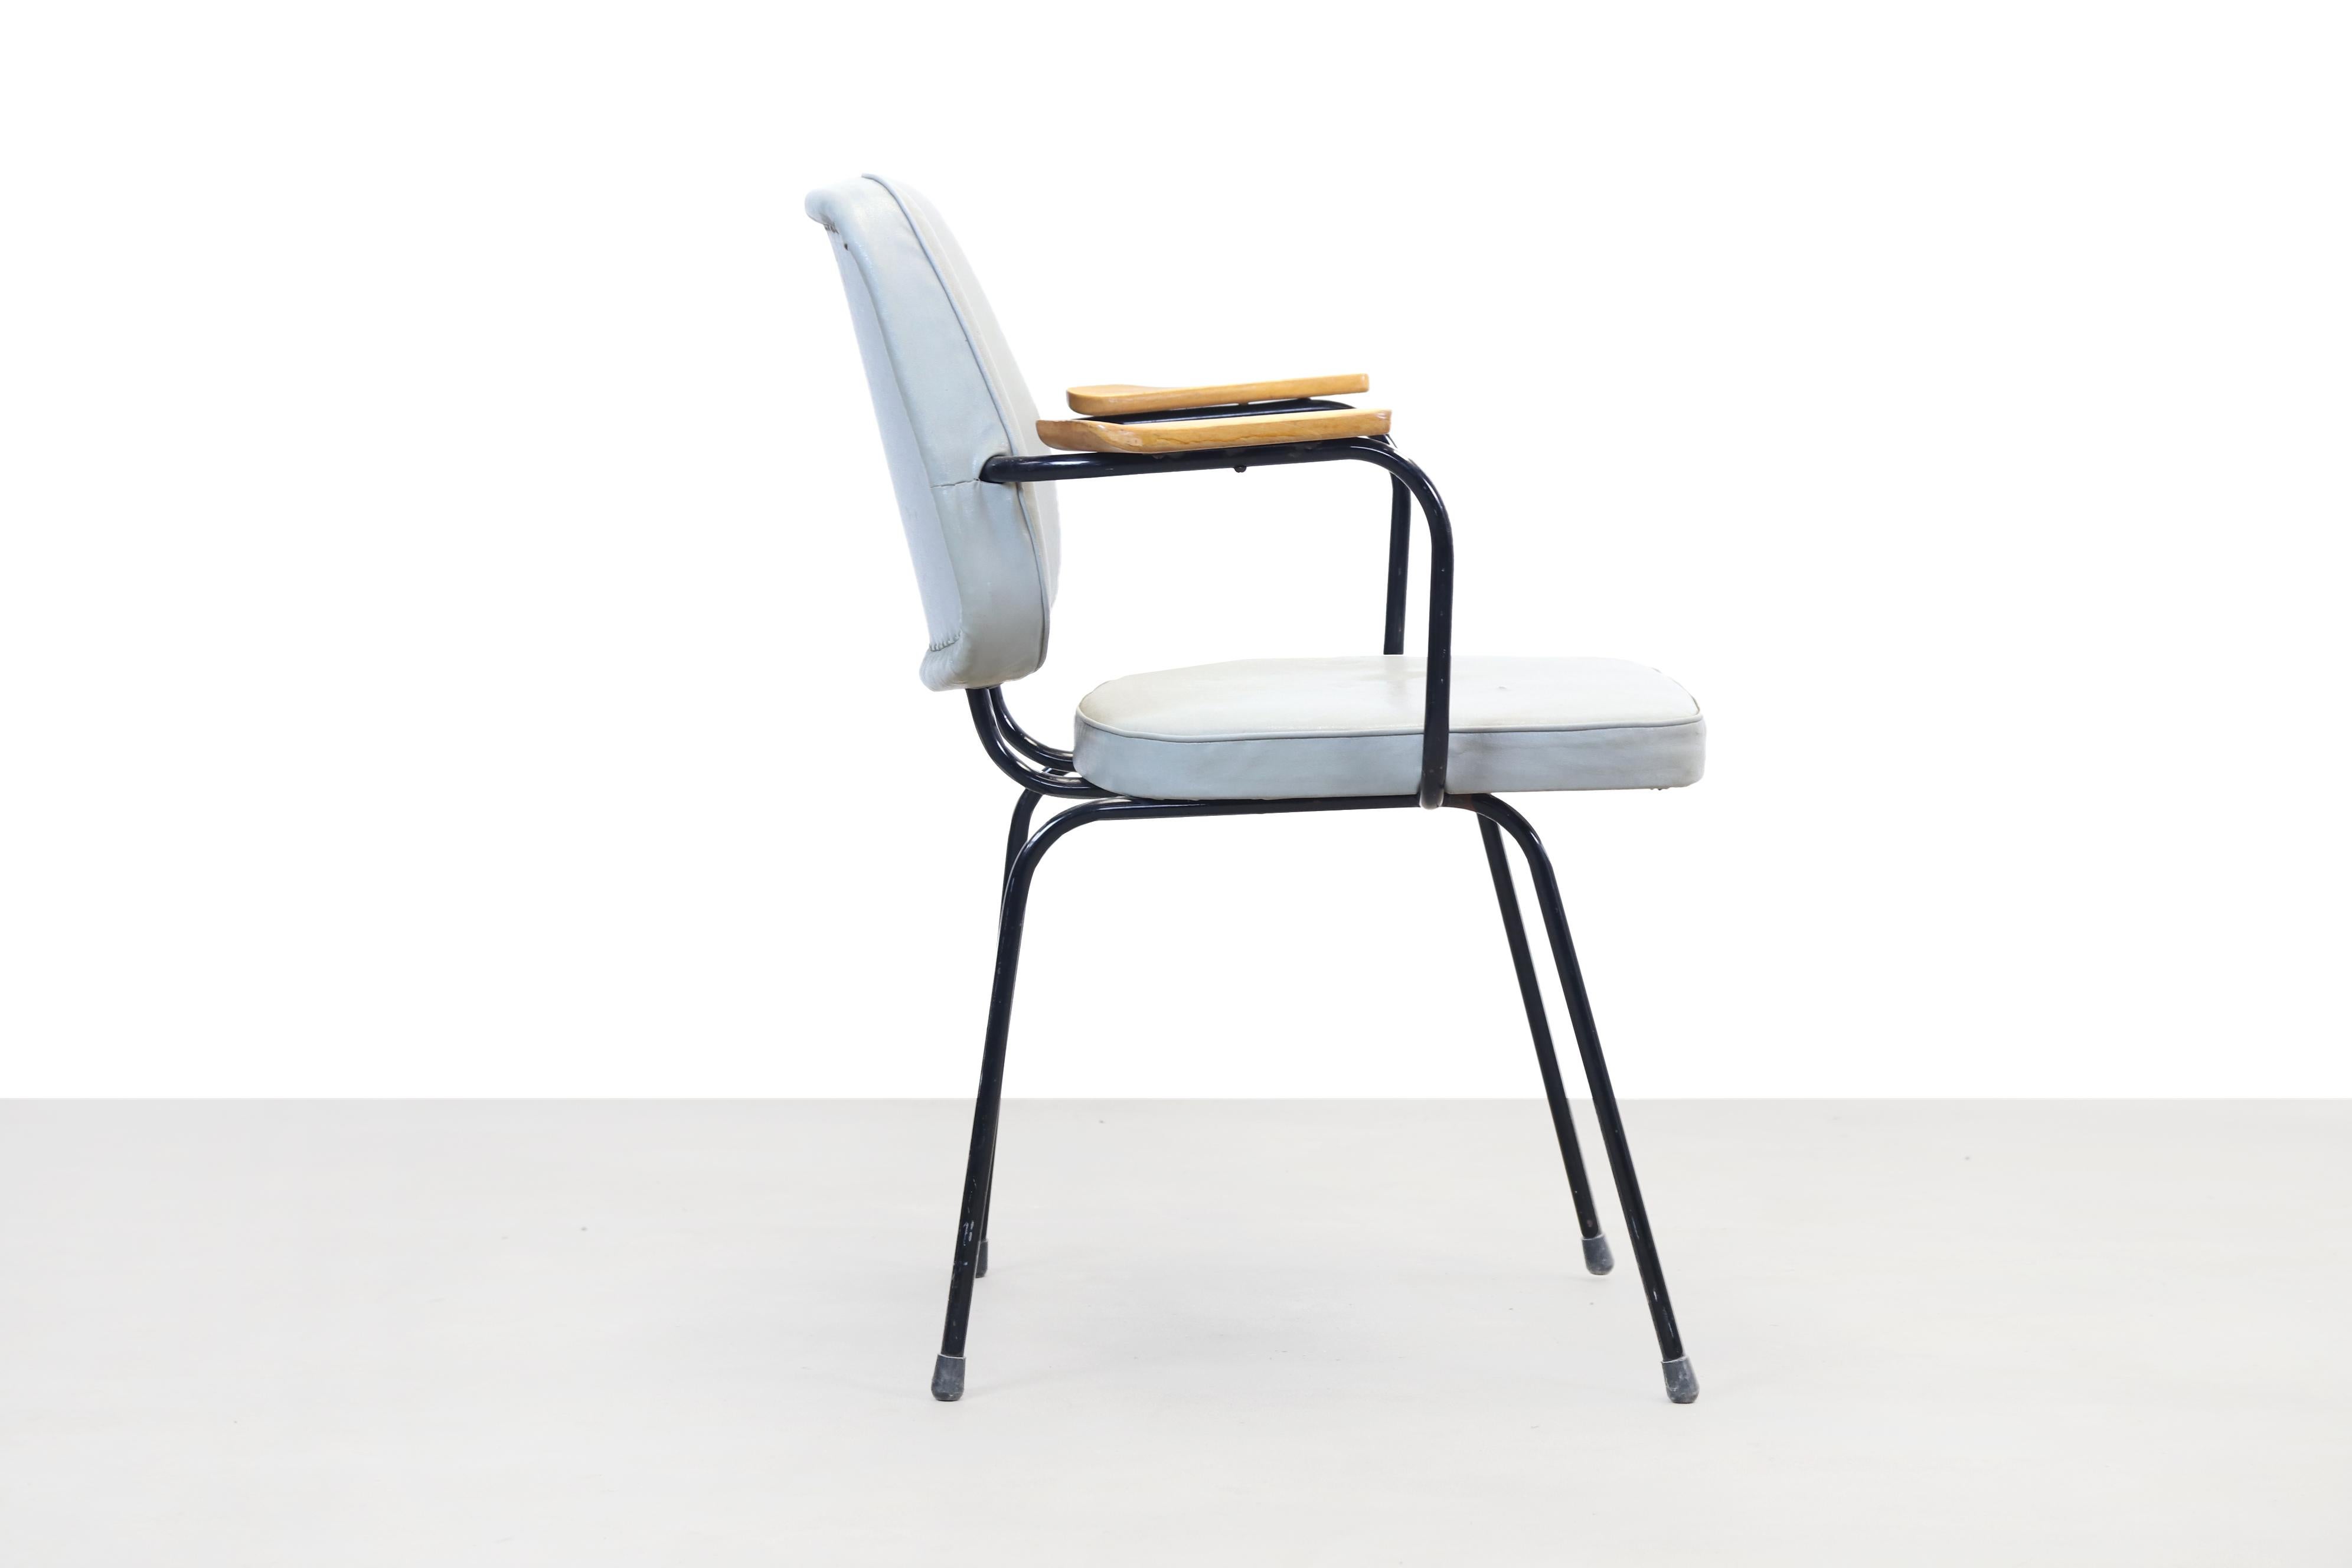 19th Century Pastoe FM01 Dutch design Chair by Cees Braakman for Pastoe, 1950's Netherlands